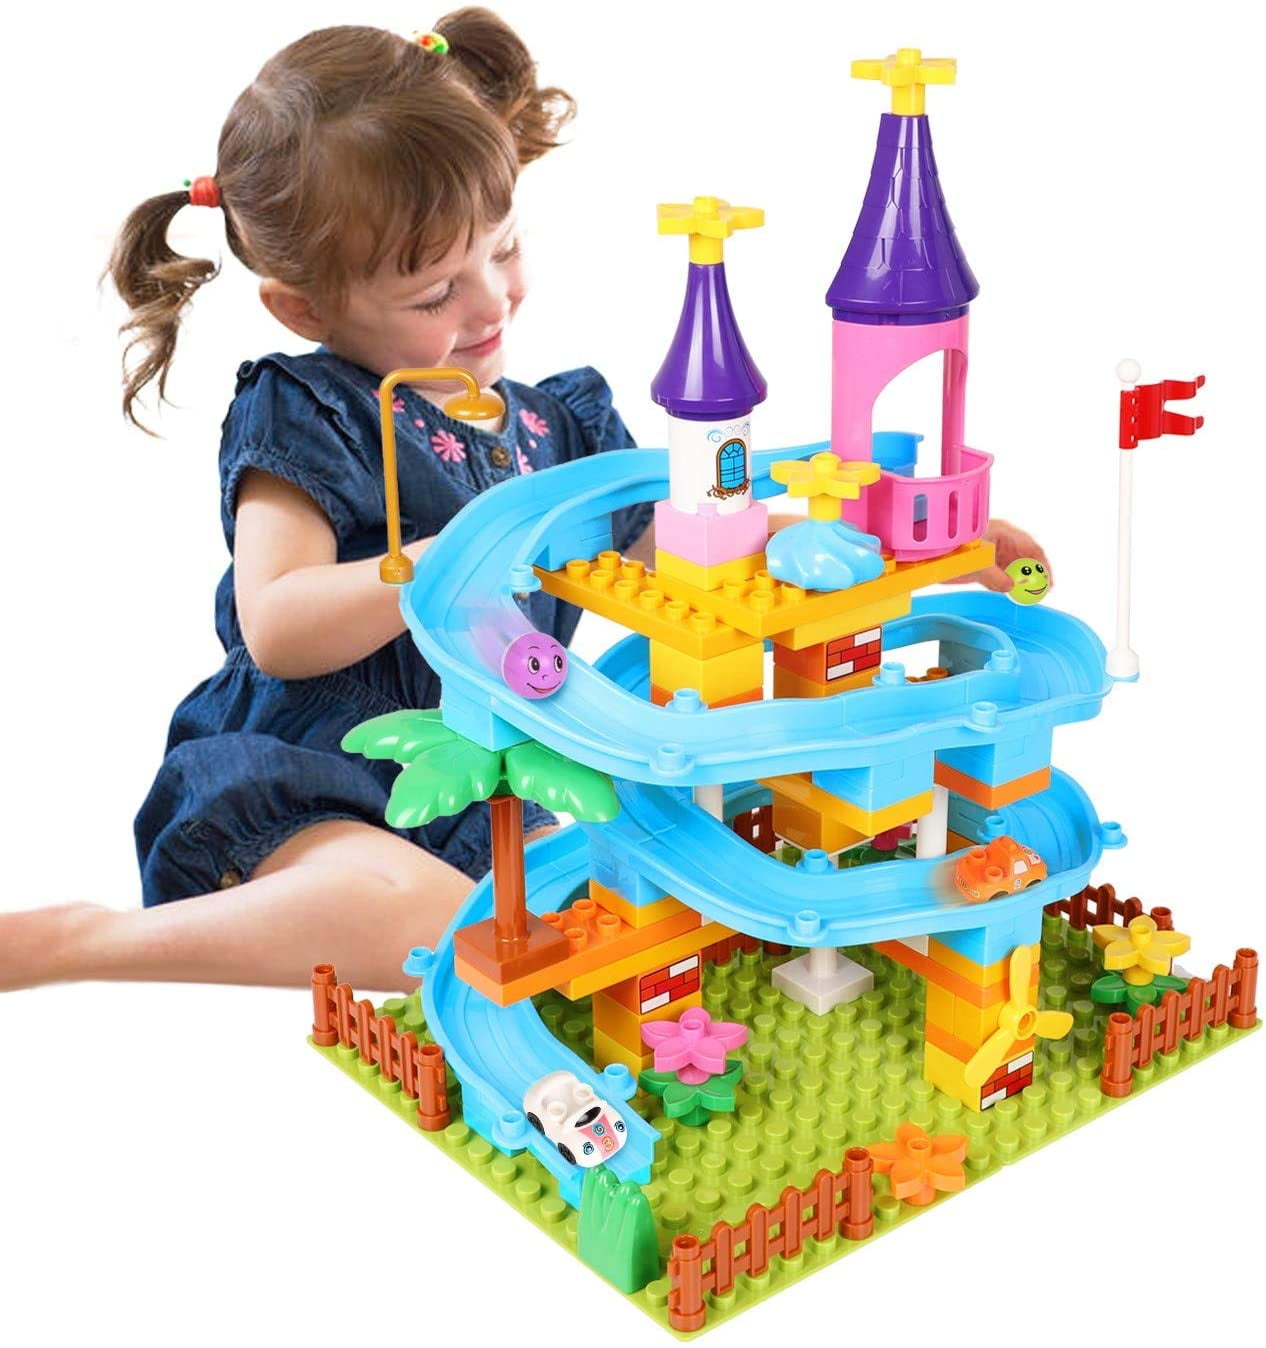 Mini STEM Dining Cart Foods Stacking Bricks Christmas Birthday Gifts for Toddlers Kids Boys Girls Age 3 4 5 6 7 8 9 10 117 Pcs Building Blocks Toy Set 